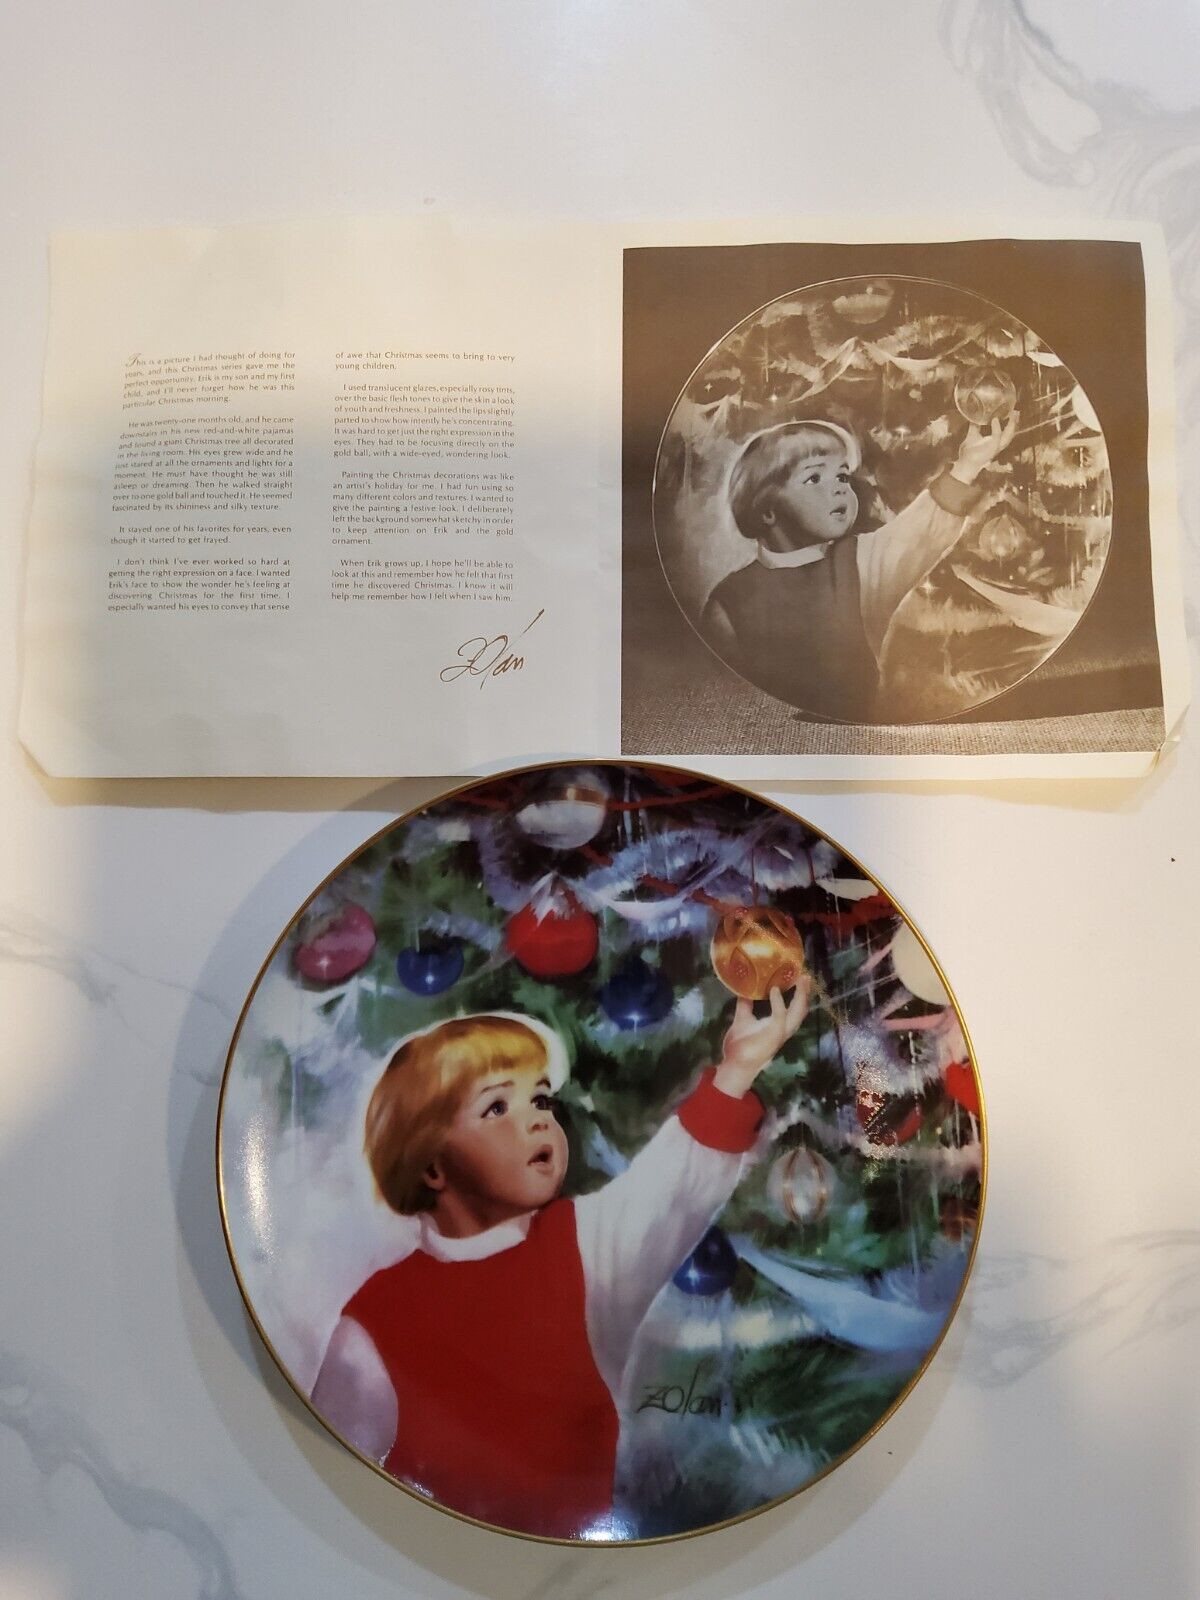 Erick's Delight Donald Zolan Wonders Of Youth Collectors Plate Pemberton & Oakes